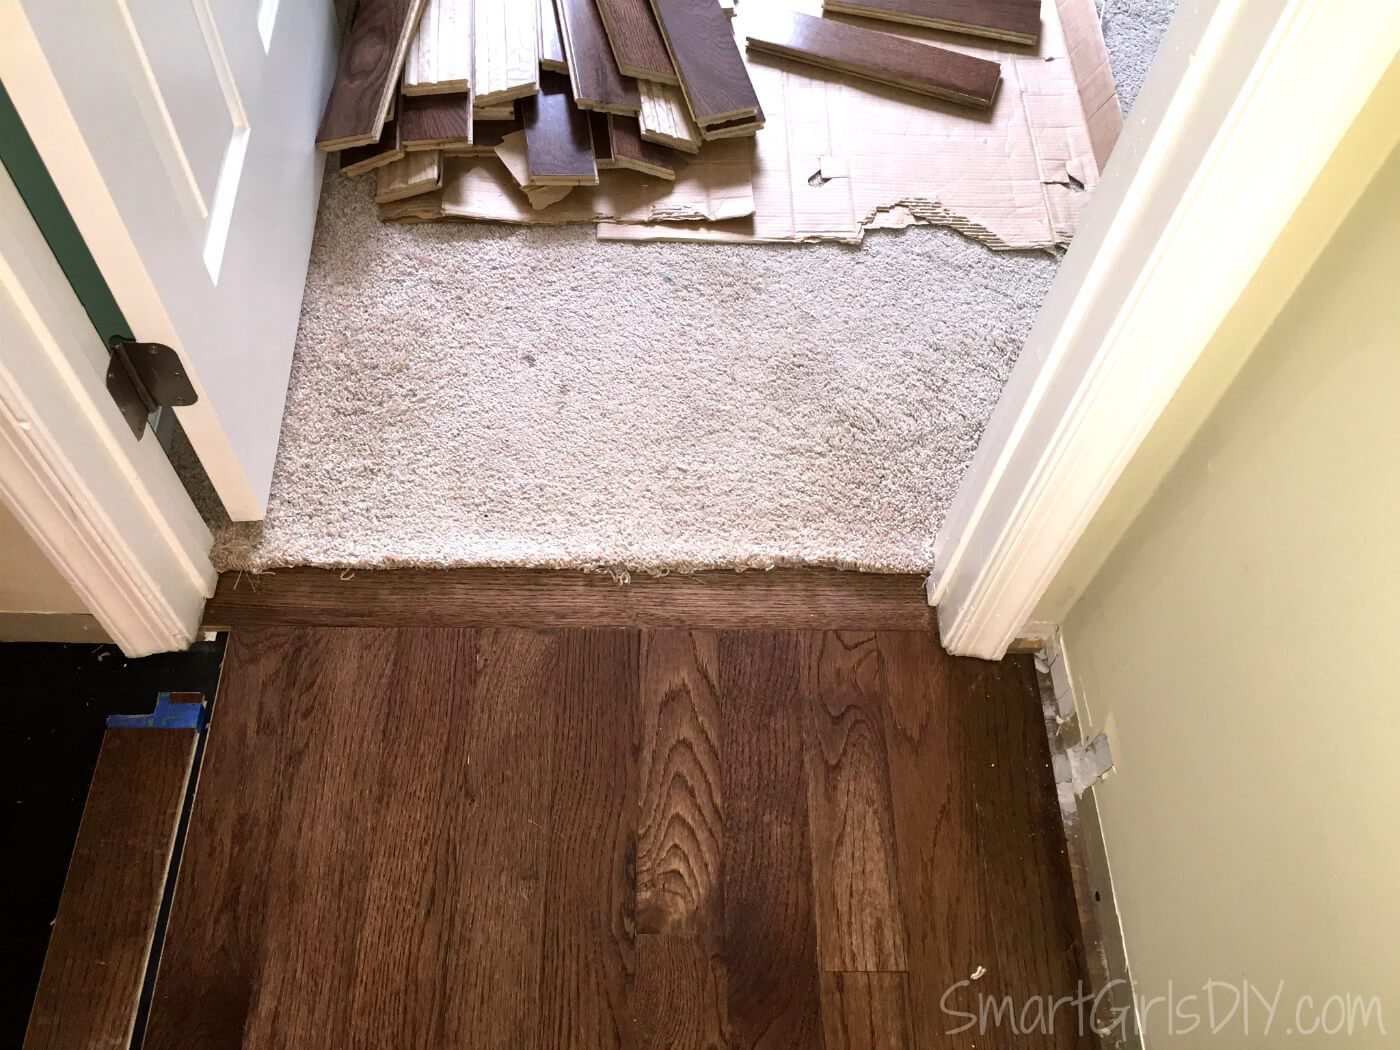 How Much Does Hardwood Flooring Cost Per Square Foot Installed Of Upstairs Hallway 1 Installing Hardwood Floors Pertaining to Transition Between Carpet and Hardwood Floor